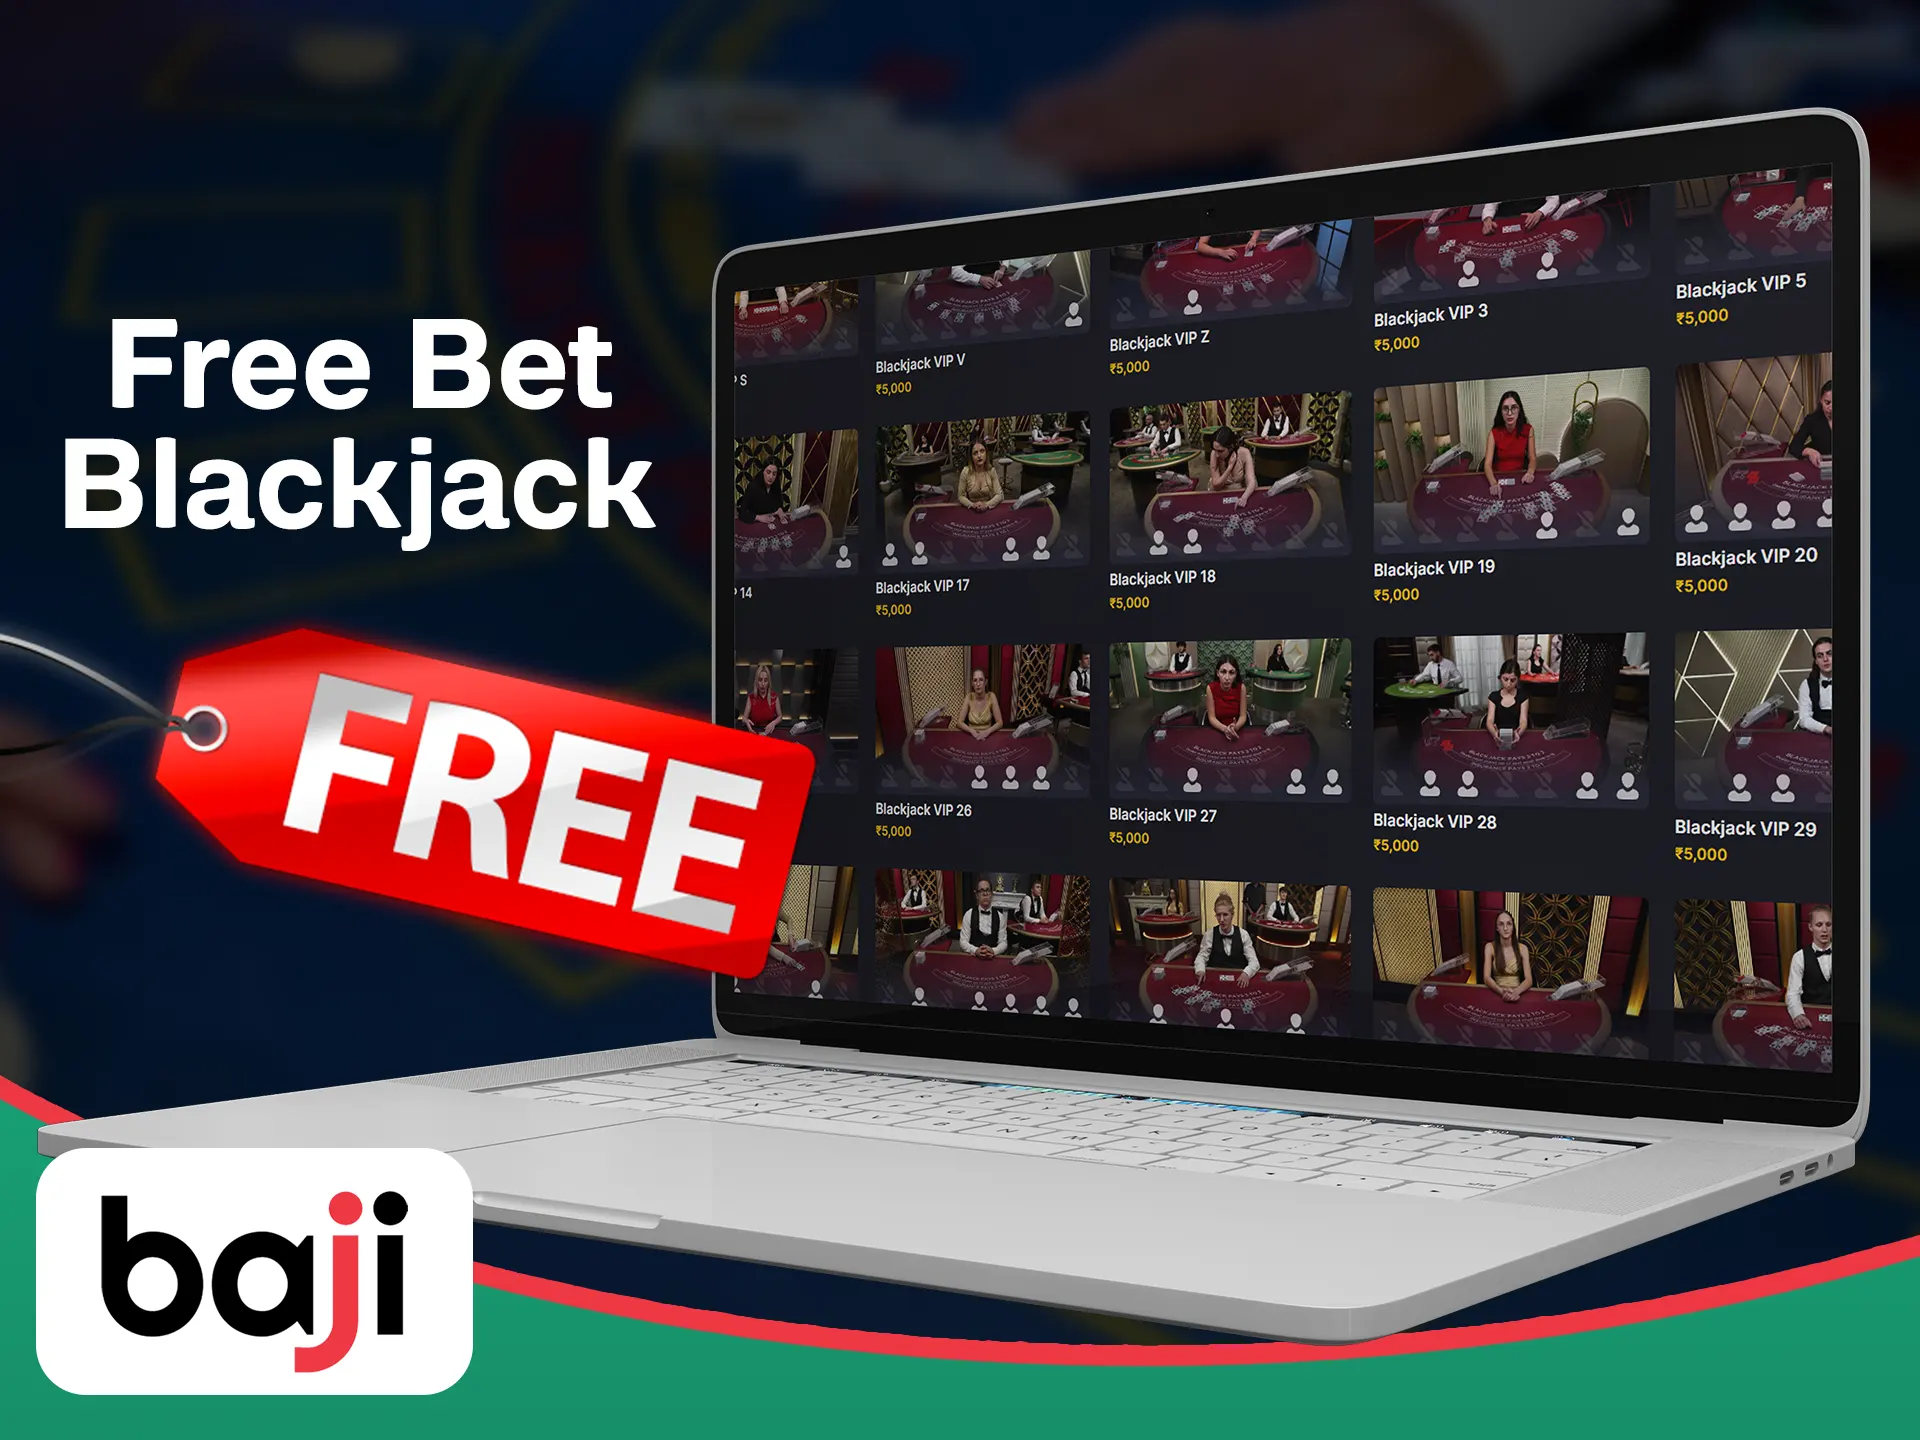 Make bets freely in the free bet blackjack at the Baji.